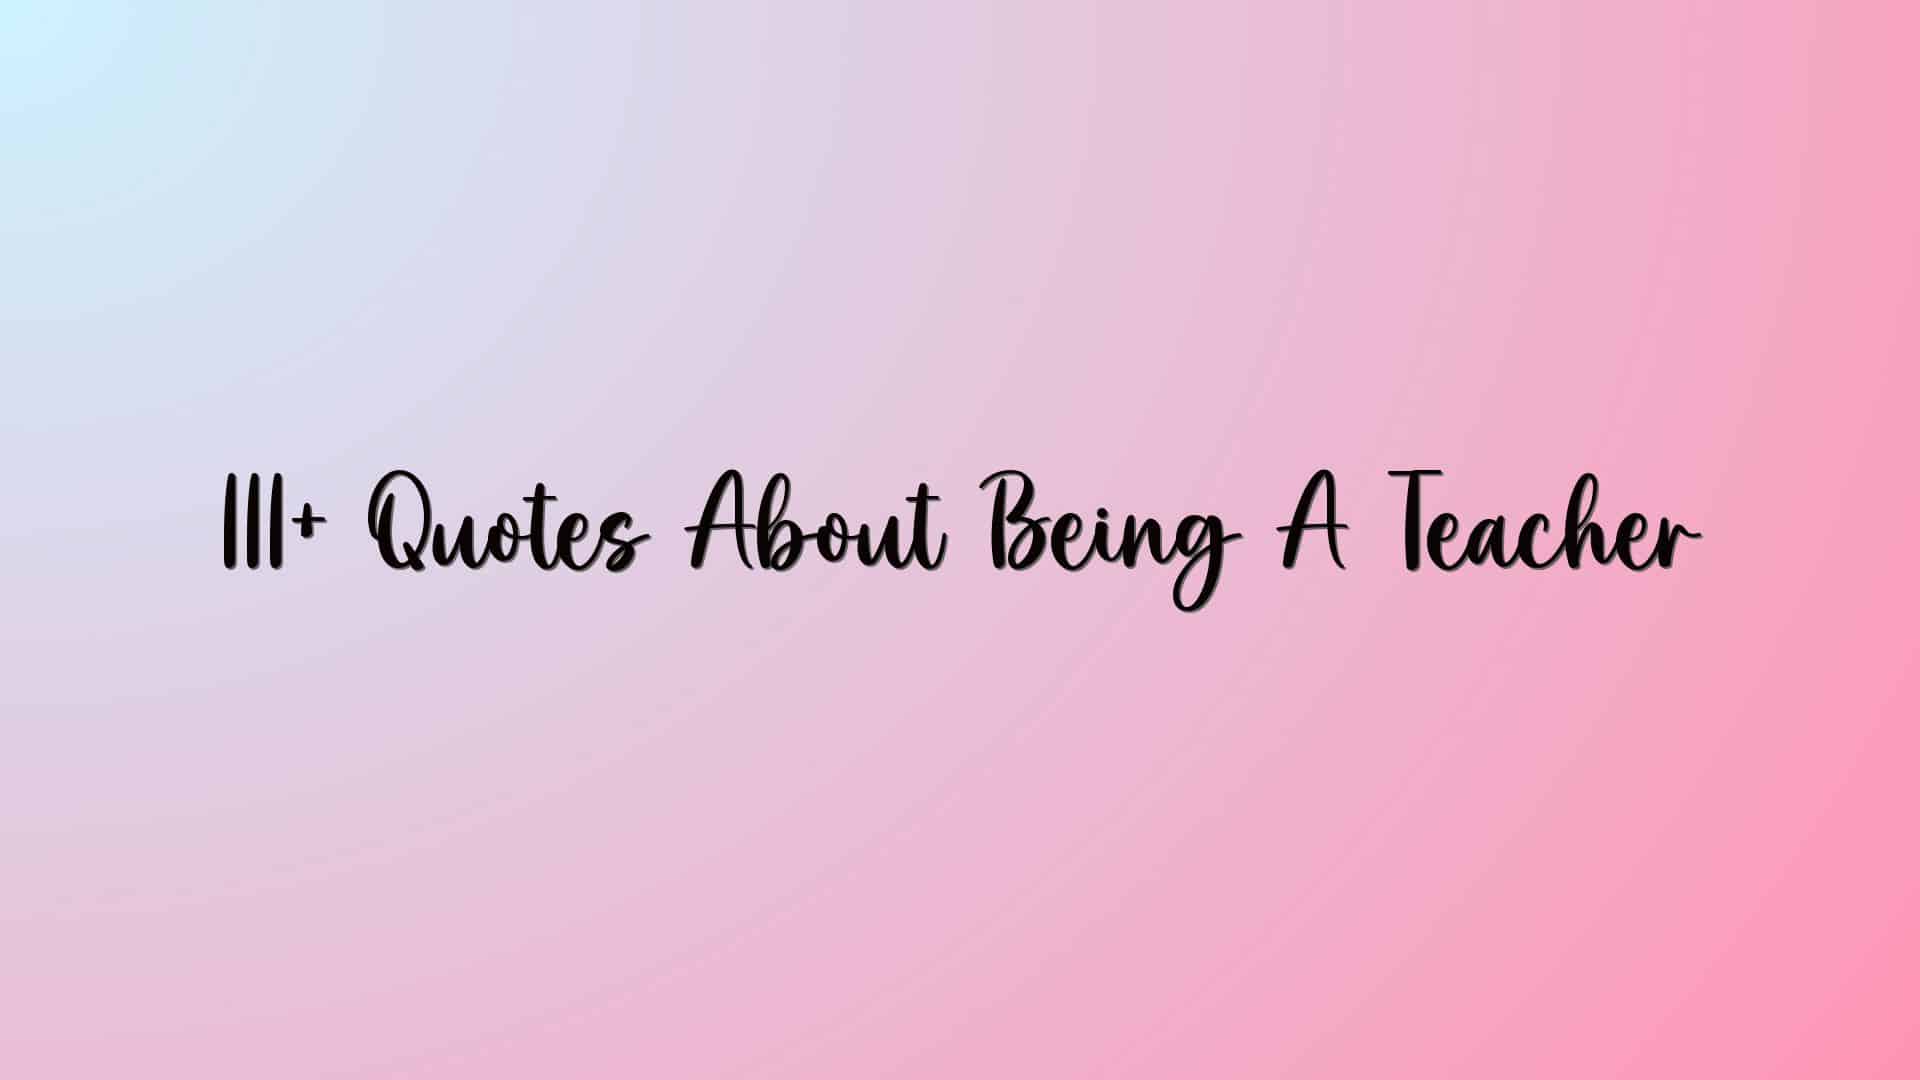 111+ Quotes About Being A Teacher